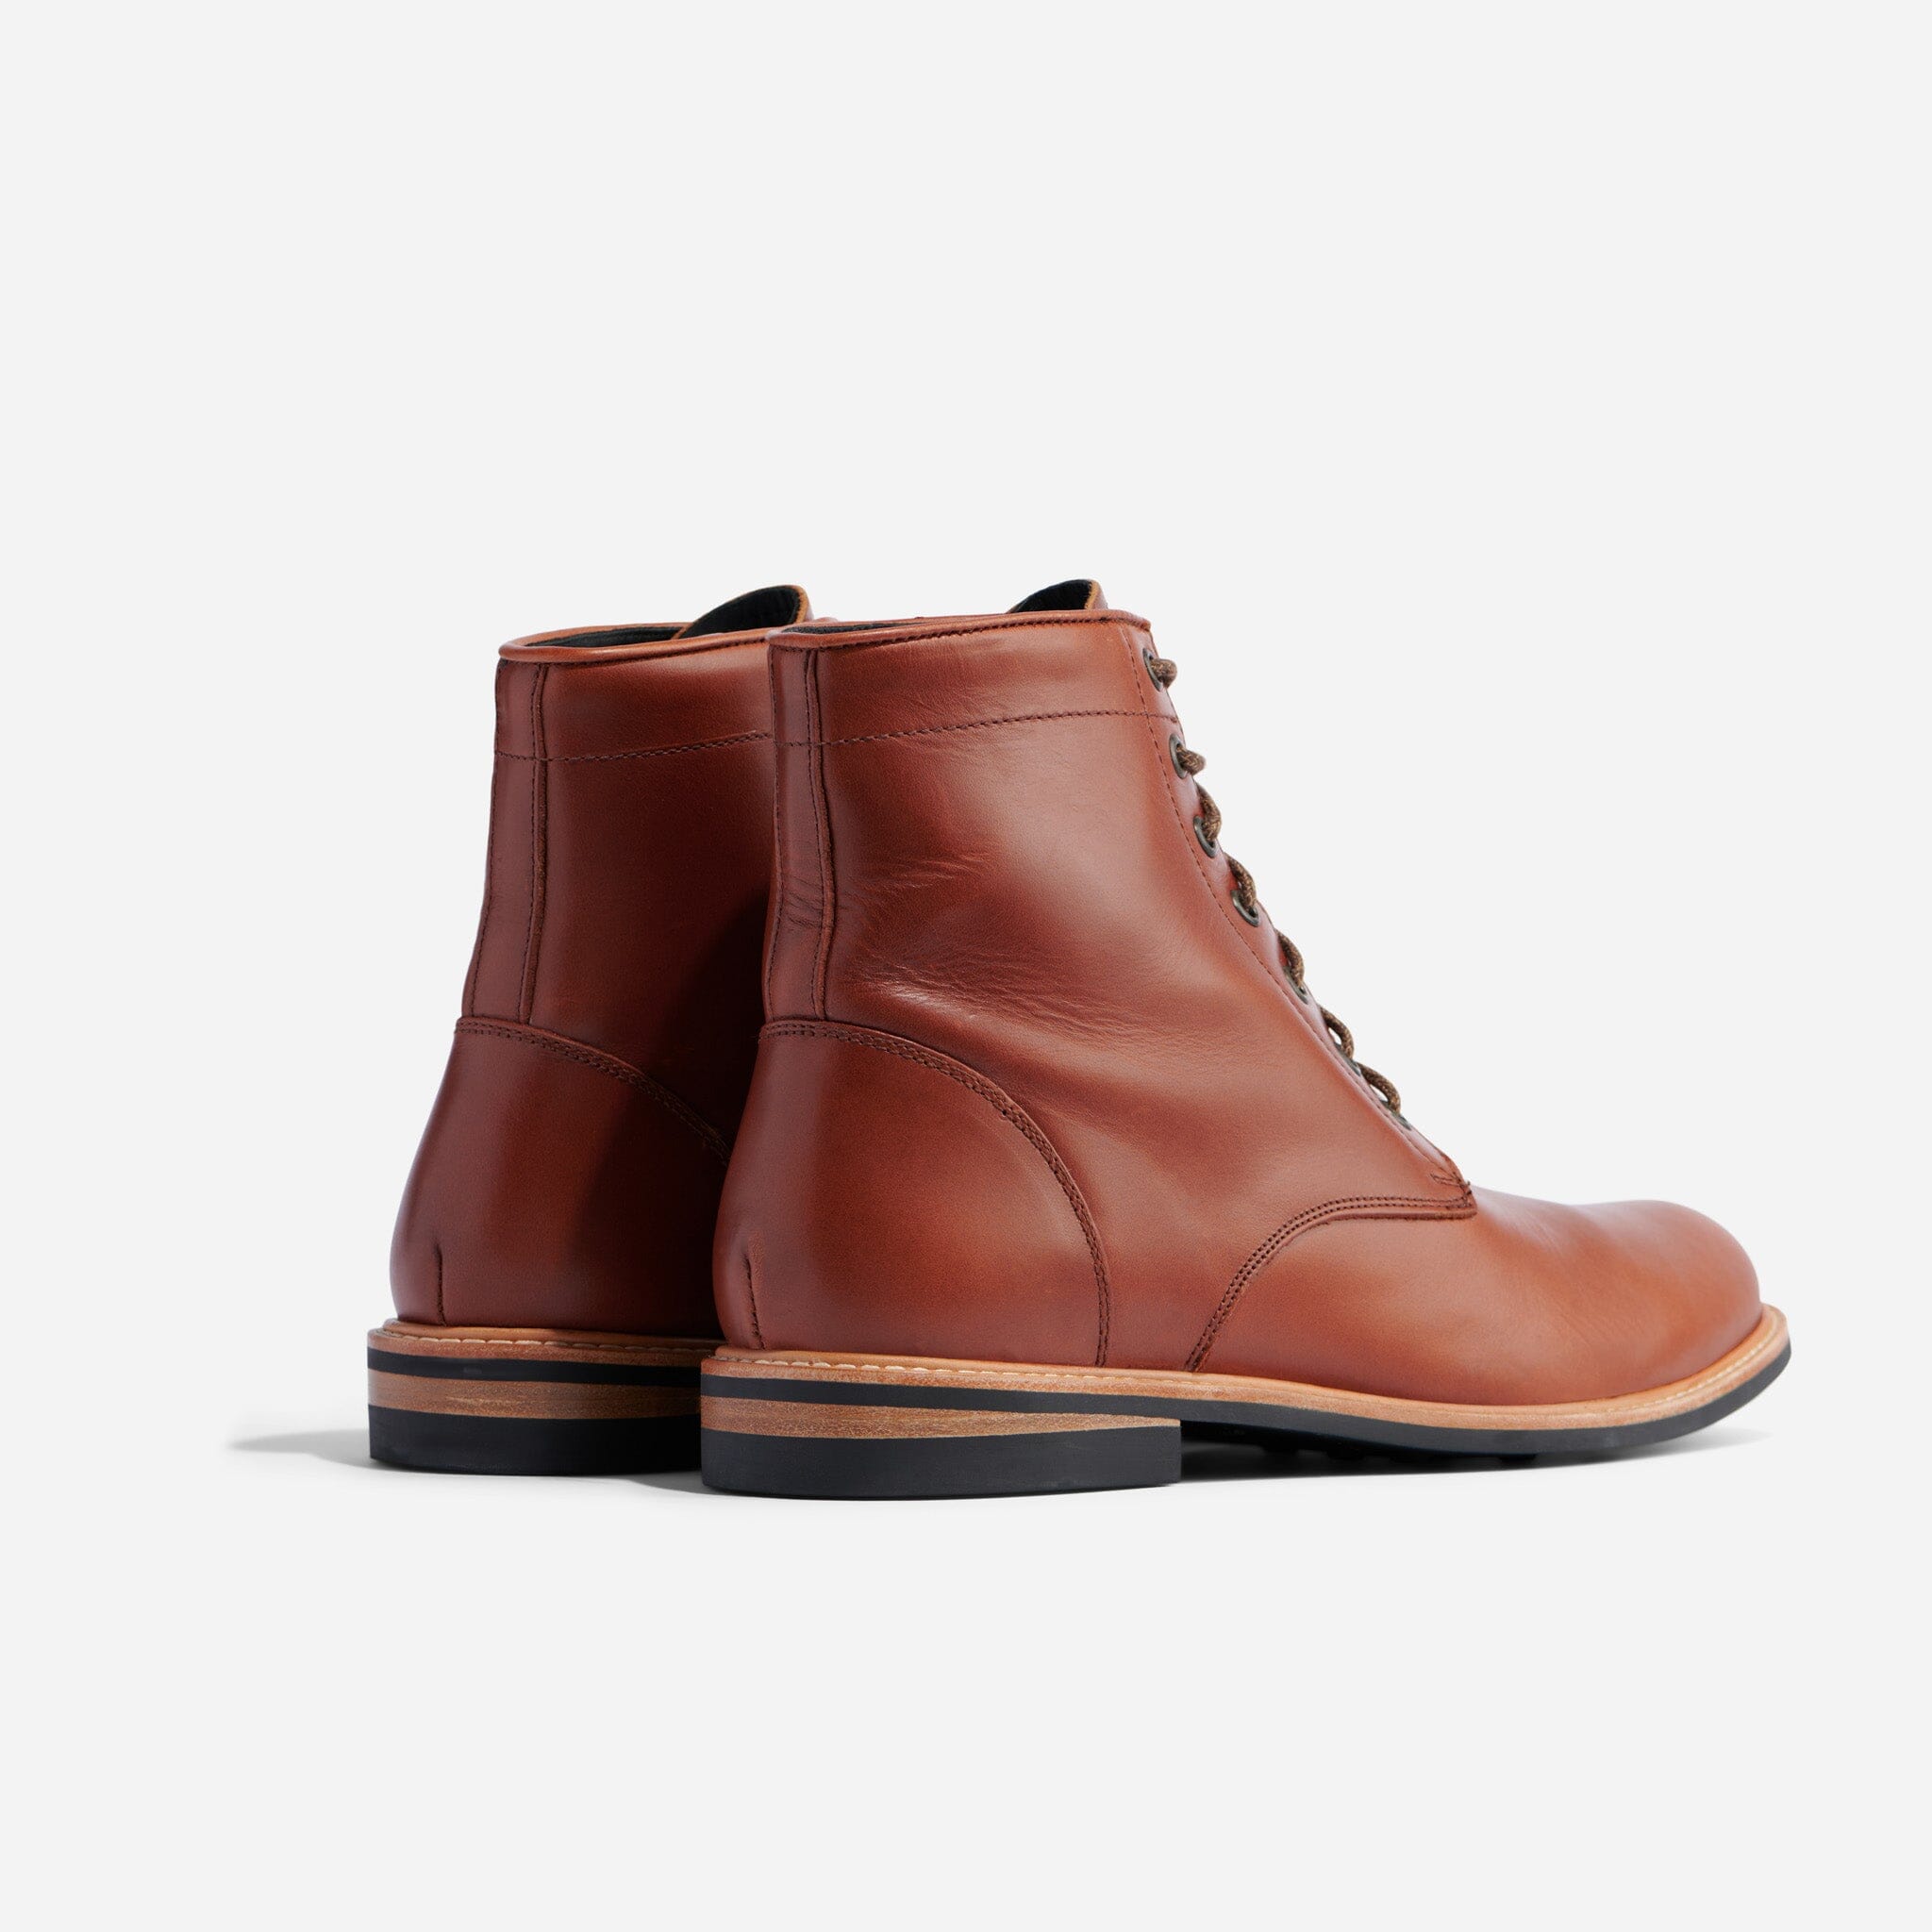 All-Weather Andres Boot Brandy Men's Leather Boot Nisolo 